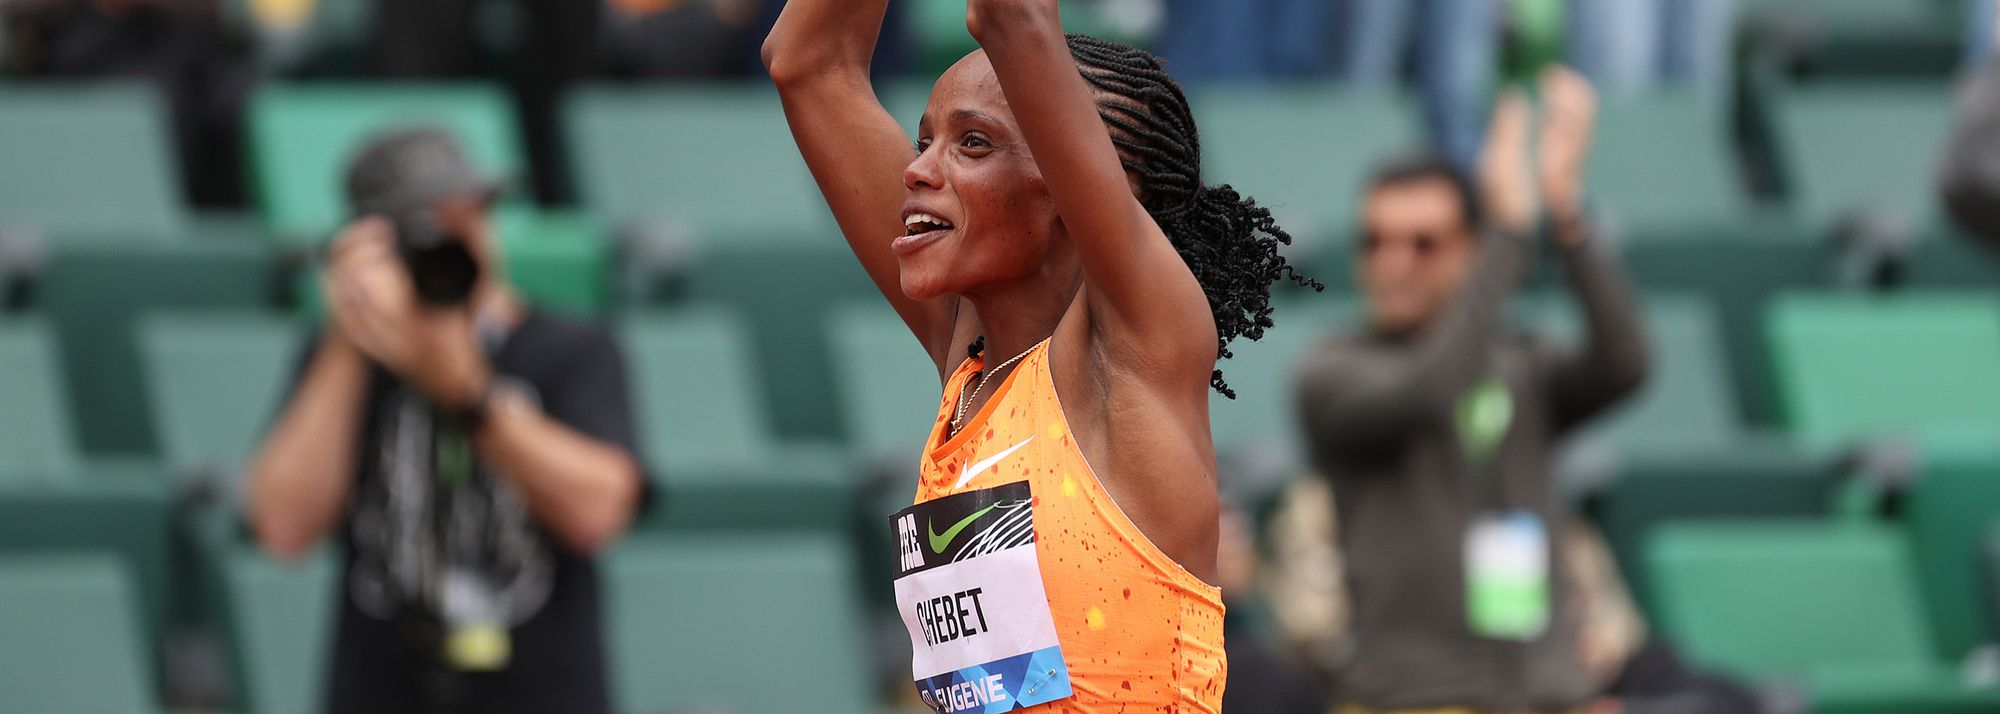 In a race that was set up as a 10,000m world record attempt, Beatrice Chebet of Kenya ran 28:54.14* to make history at the Prefontaine Classic in Eugene on Saturday